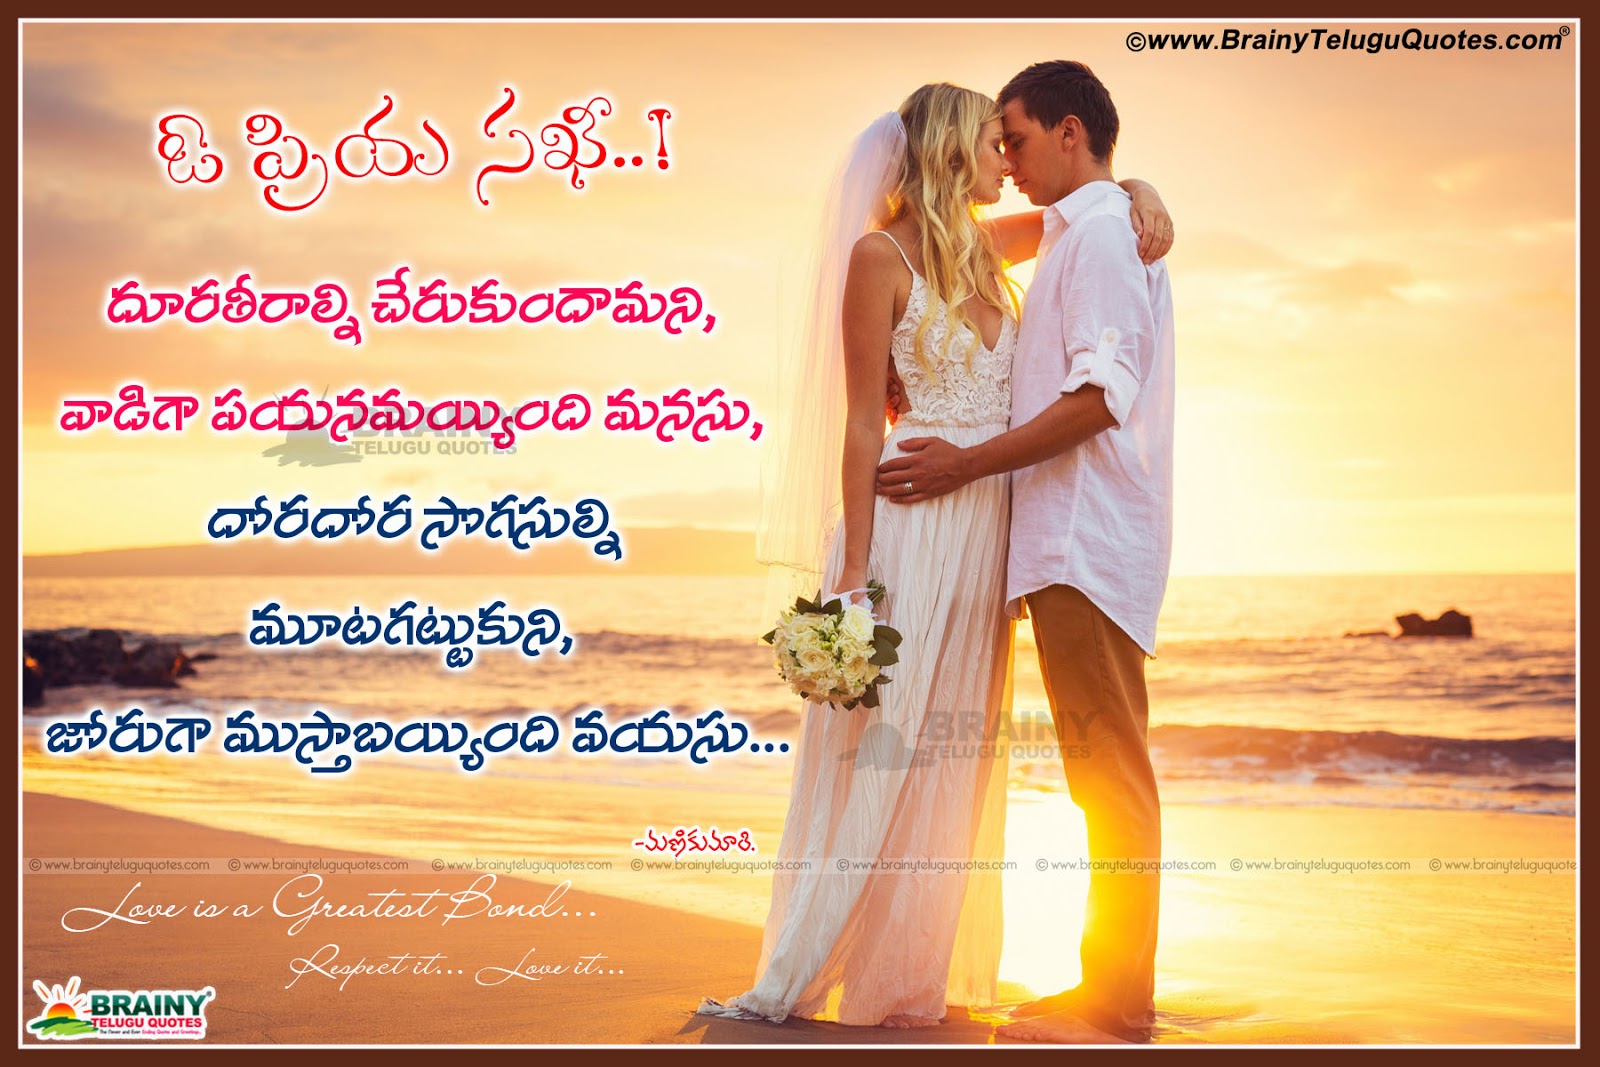 Telugu New Latest Love Quotes For Boy, Girl And Lovers - Wedding Photos Bali , HD Wallpaper & Backgrounds